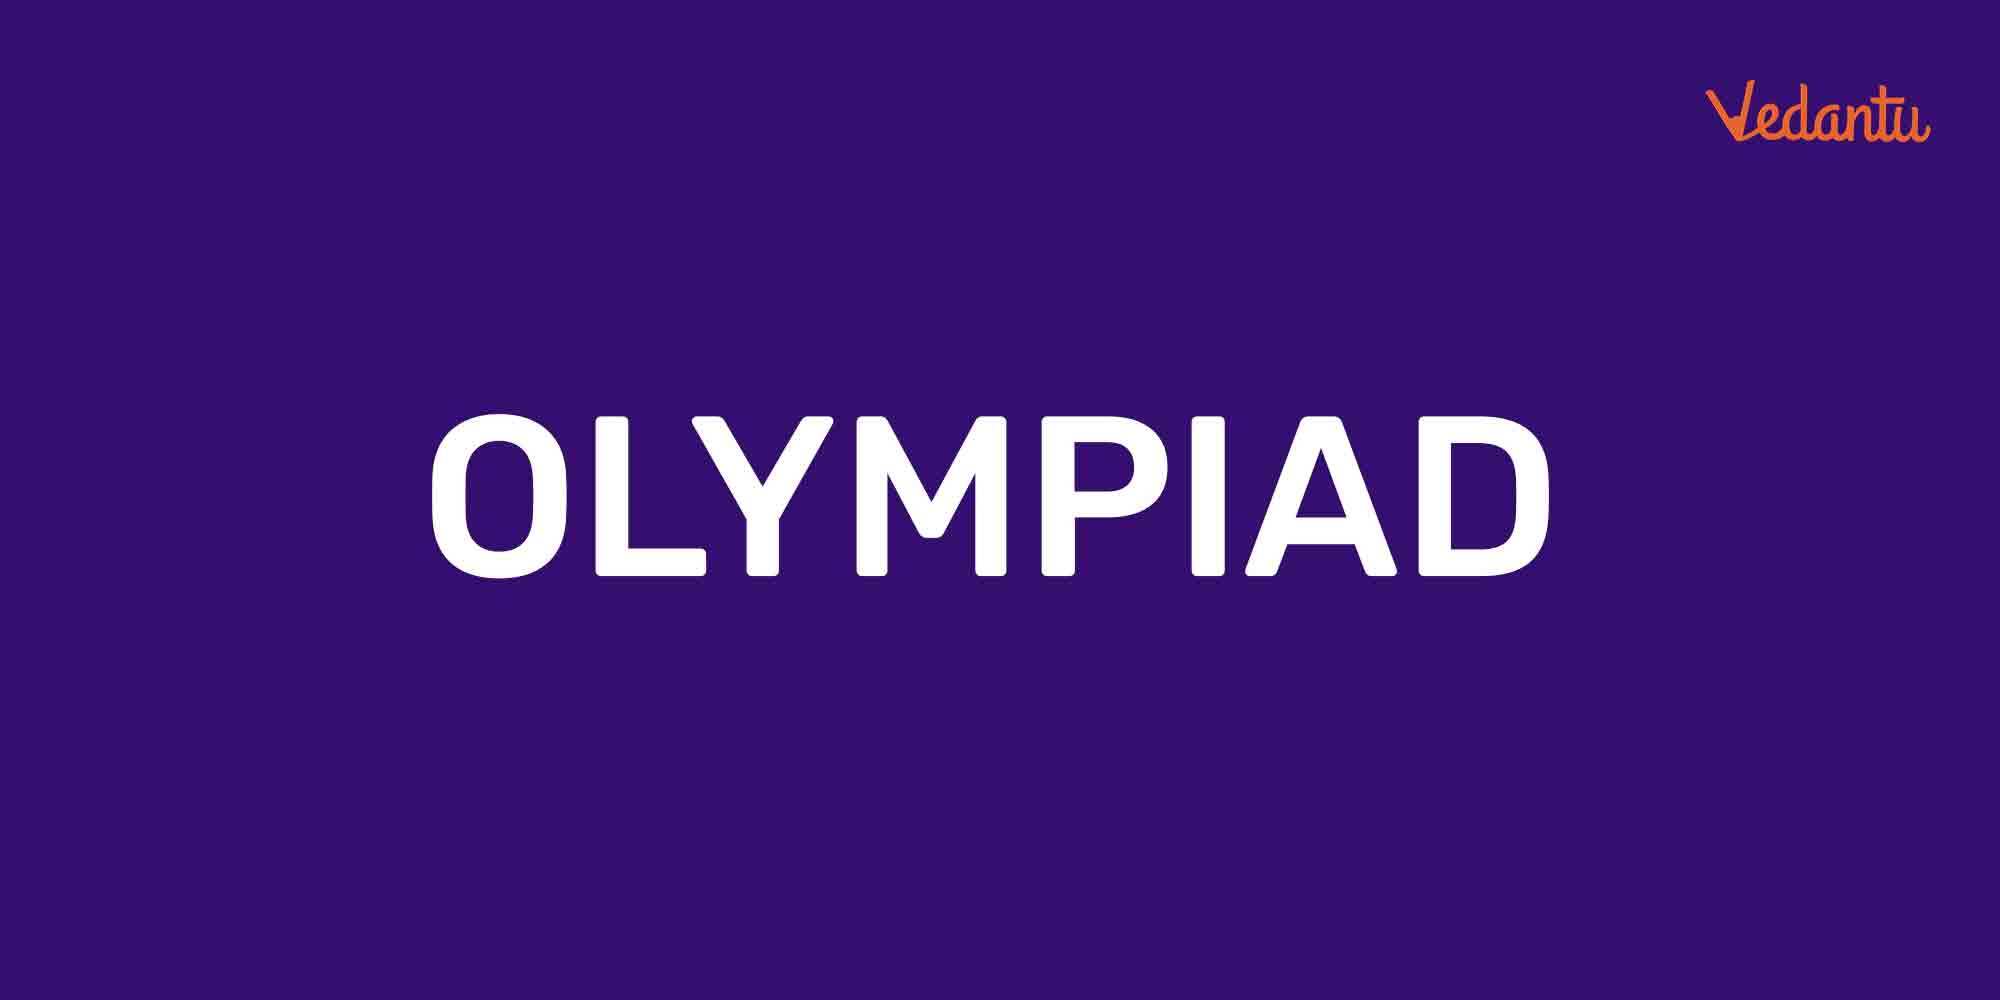 Olympiads: A Habit or A Routine?